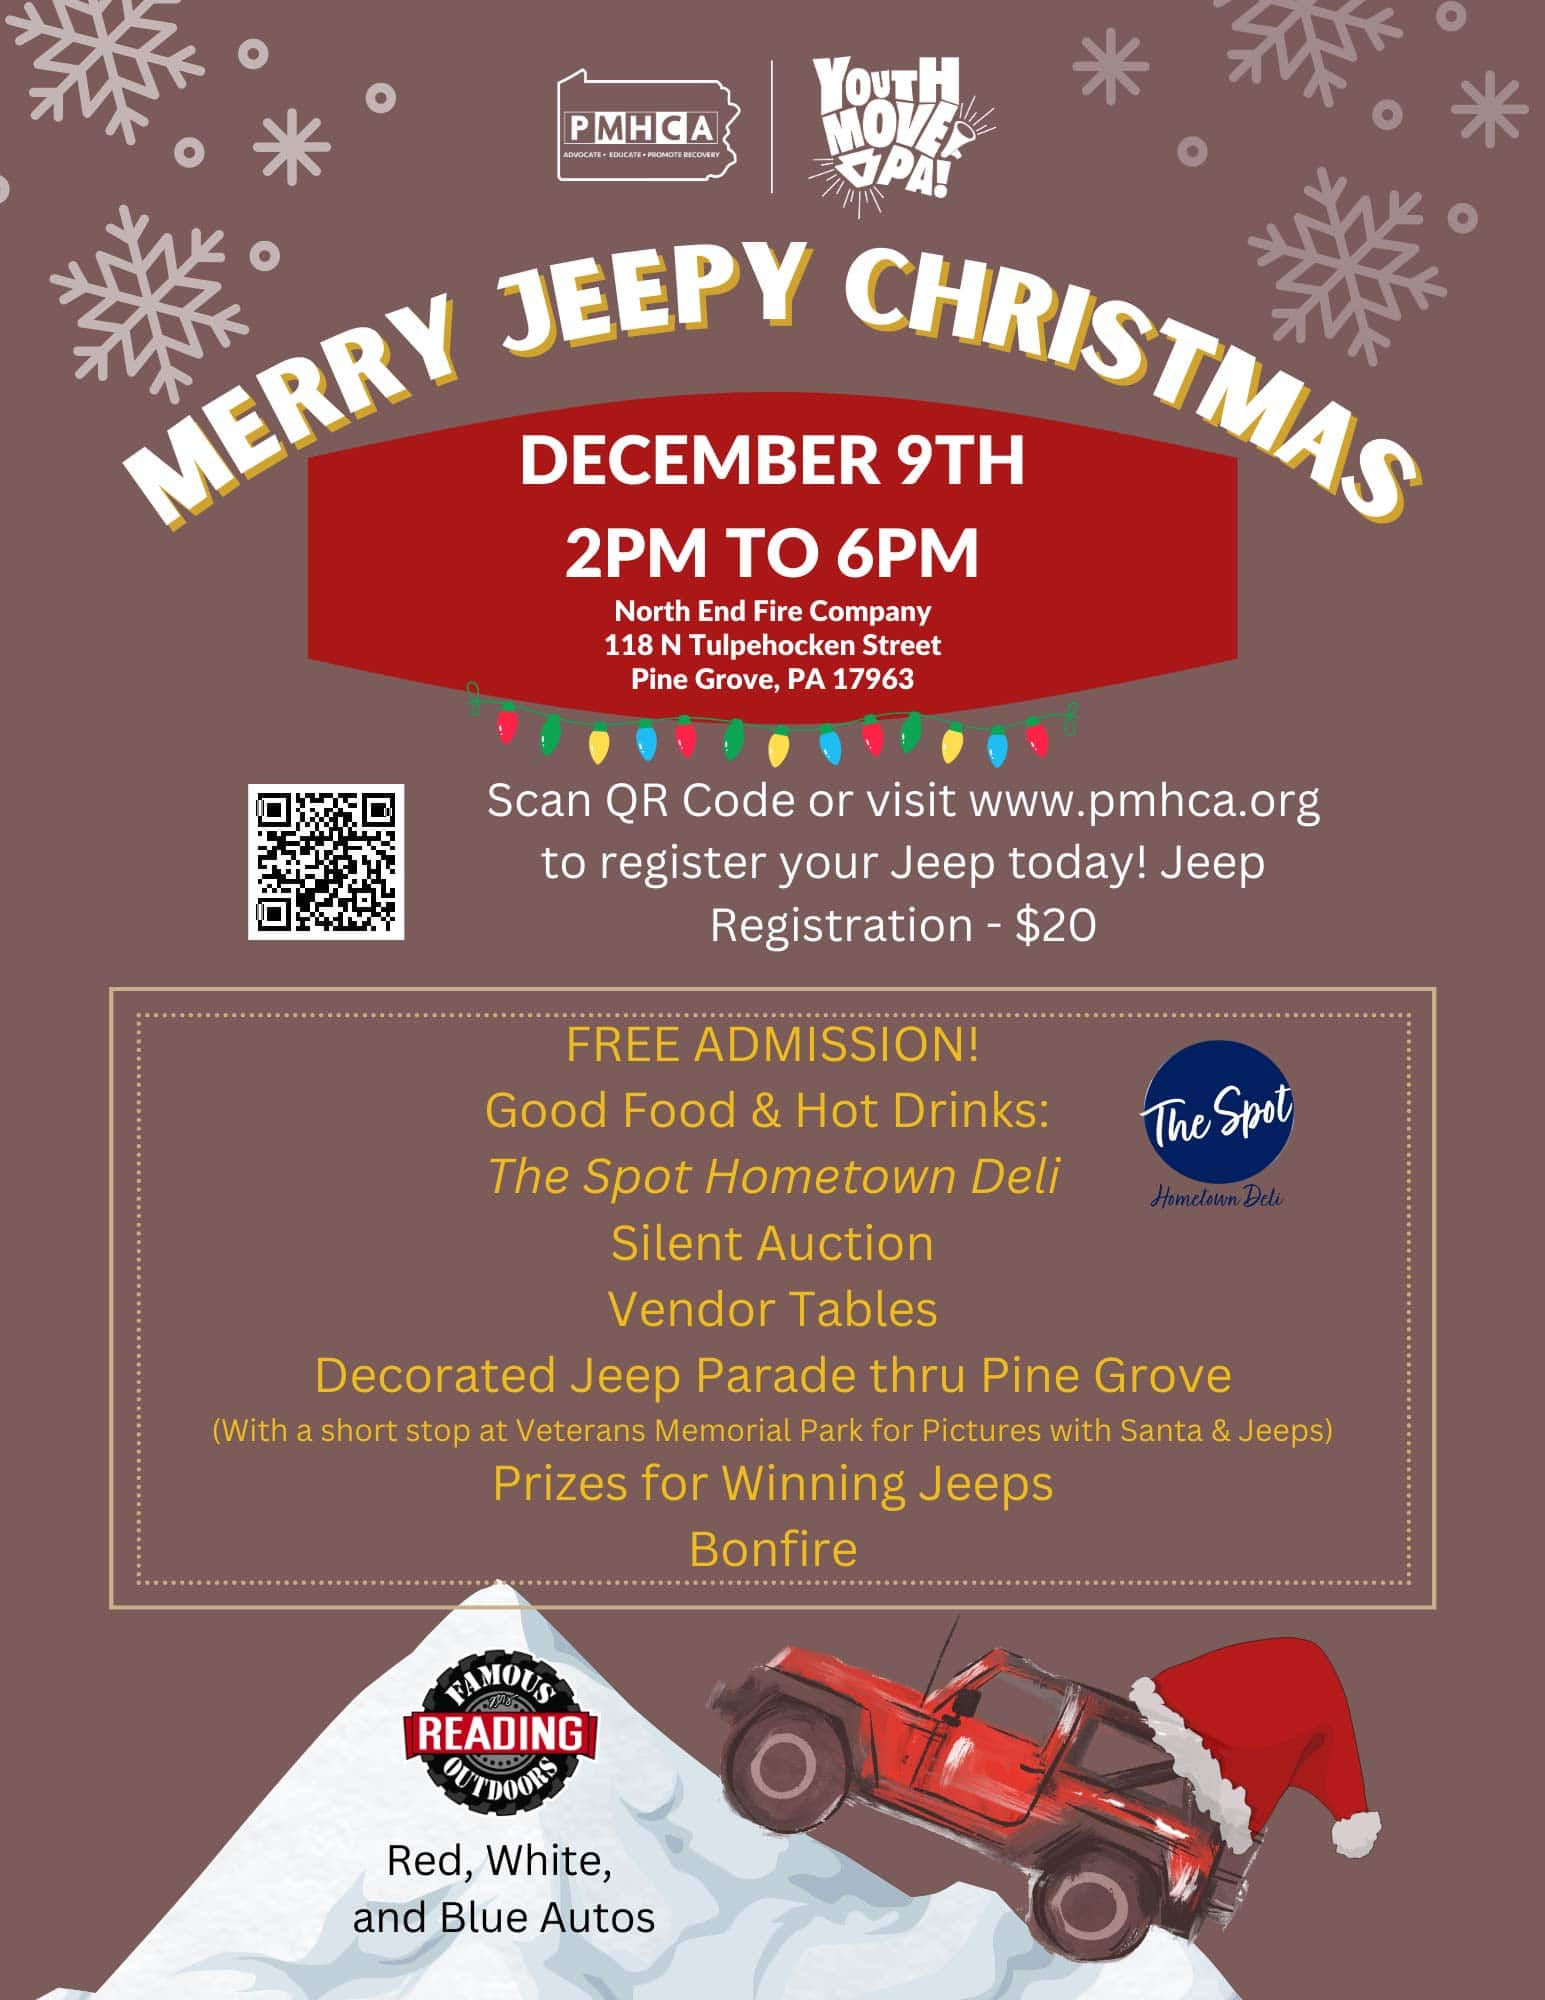 Merry Jeepy Christmas - Saturday, Dec 9th at 2pm